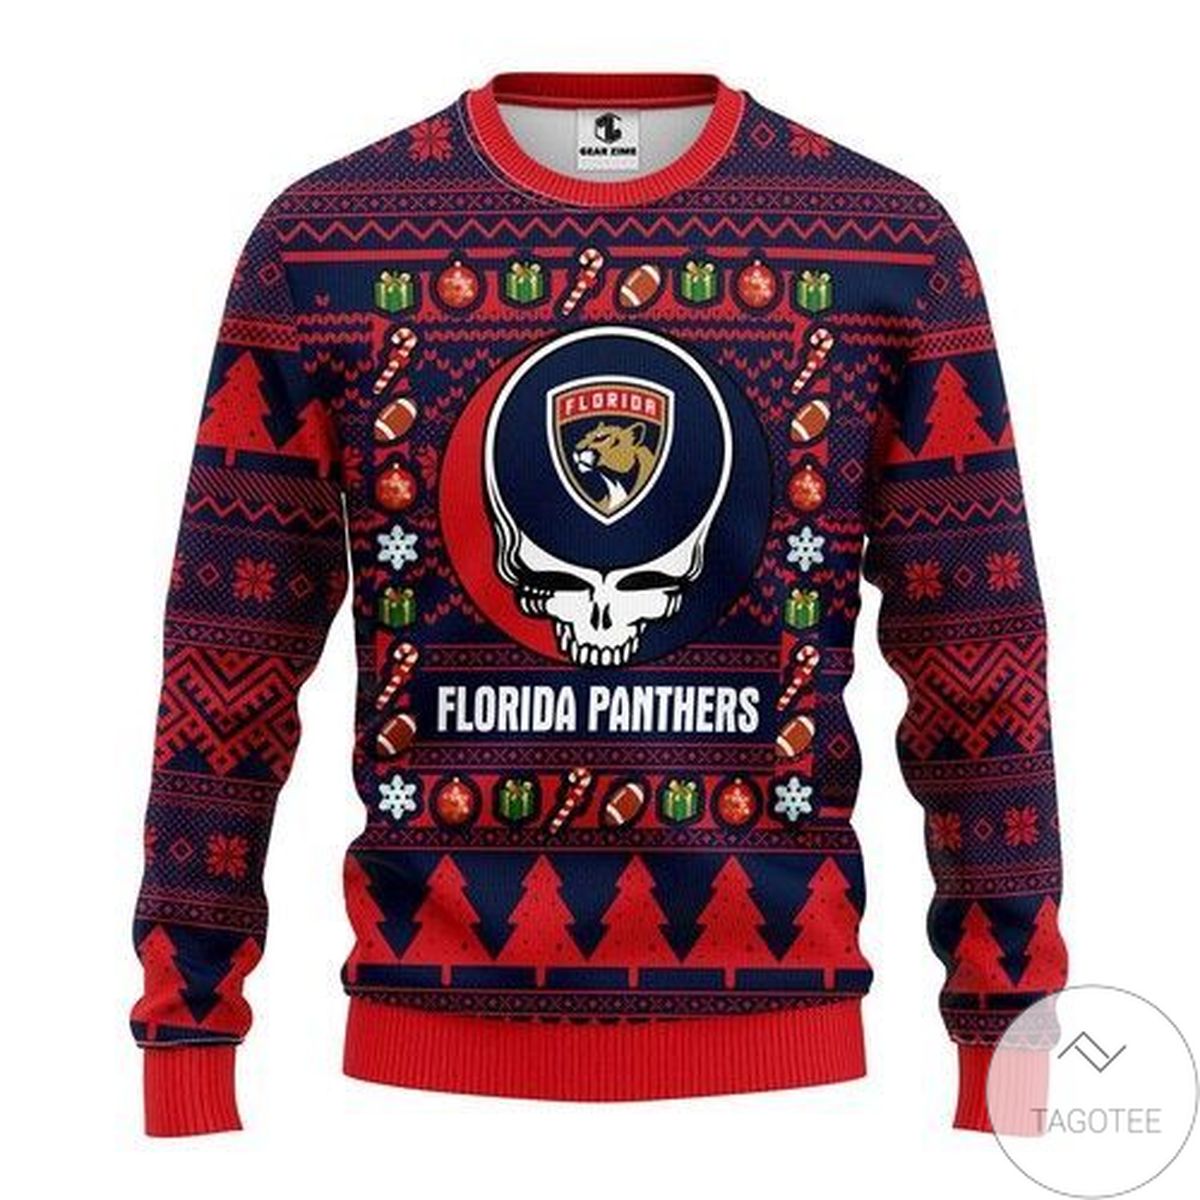 Nhl Florida Panthers Grateful Dead Ugly Christmas Sweater